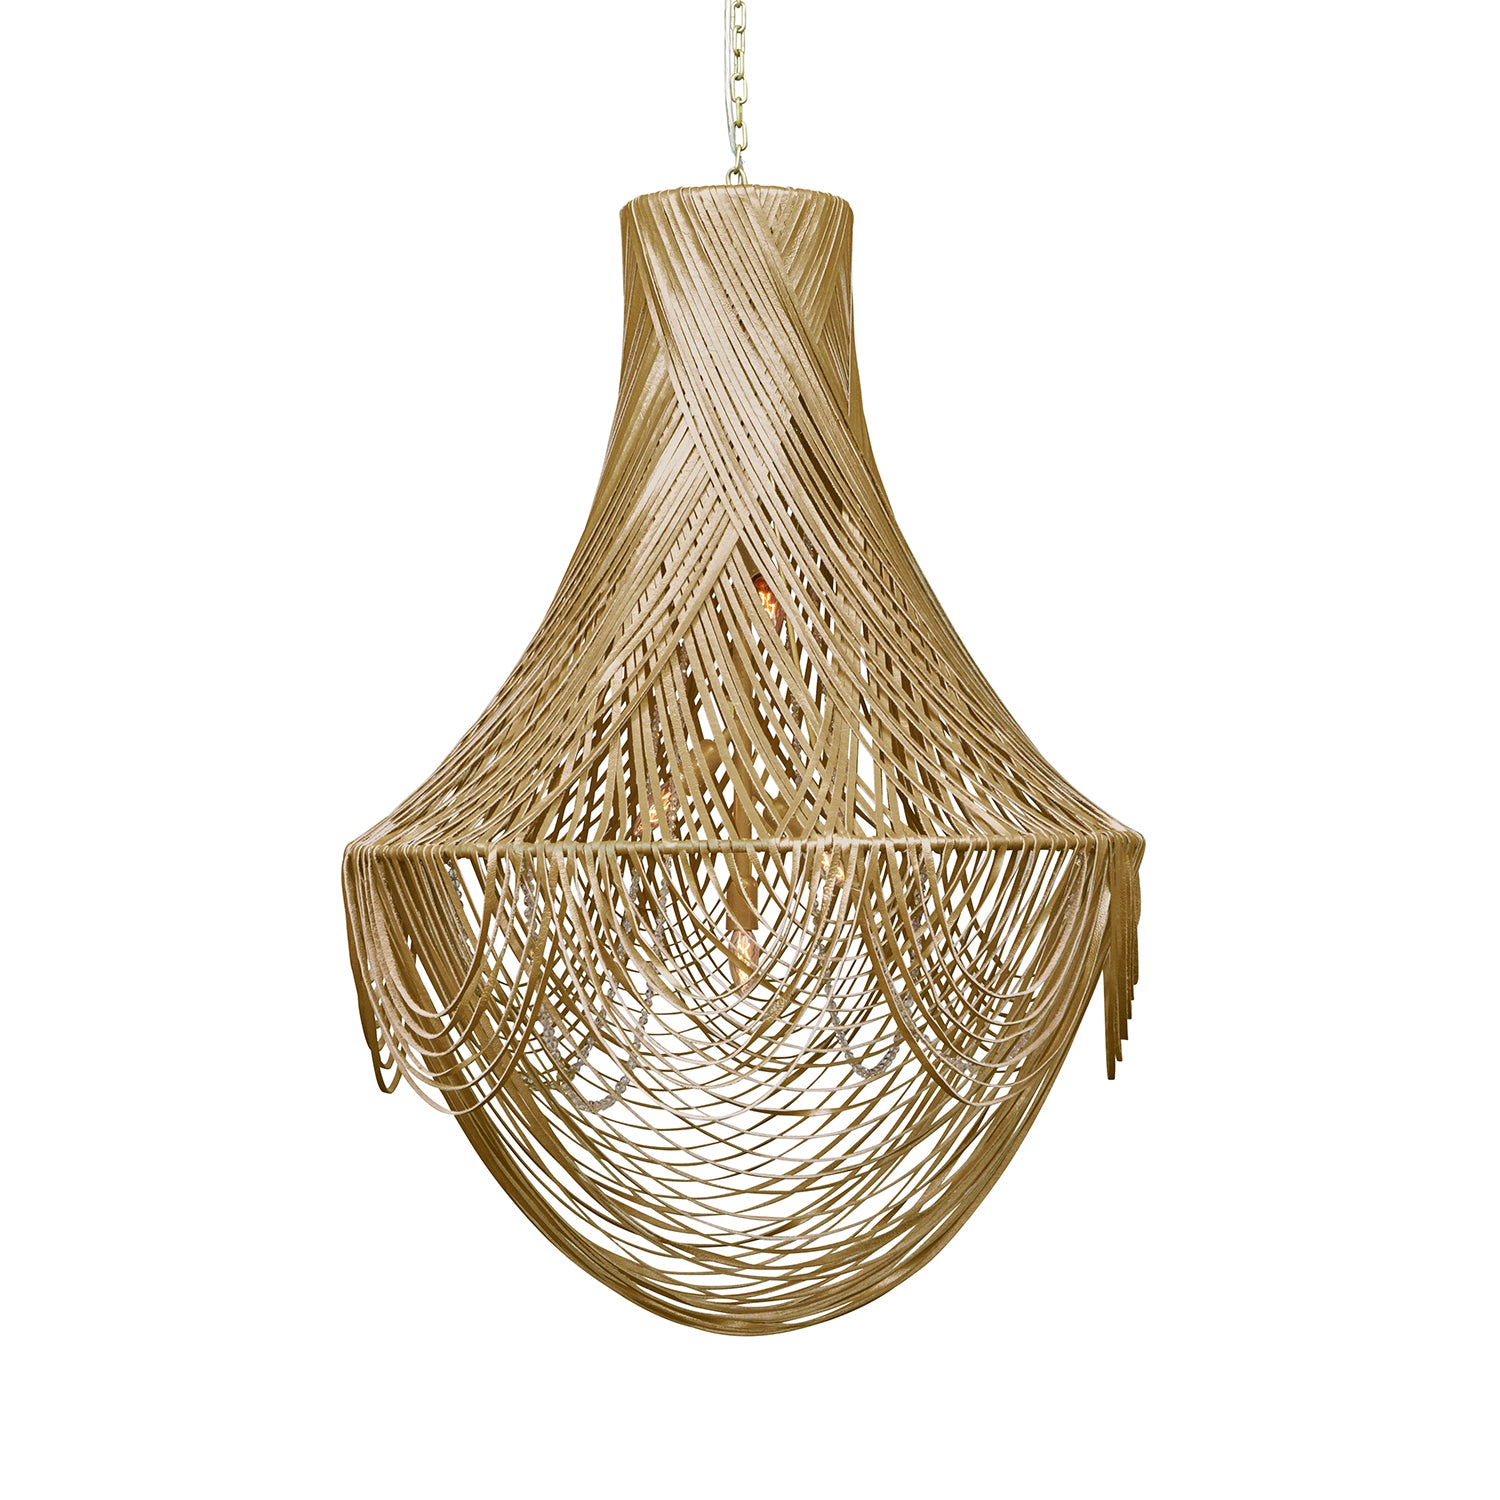 Large Empire Leather Chandelier in Metallic Leather